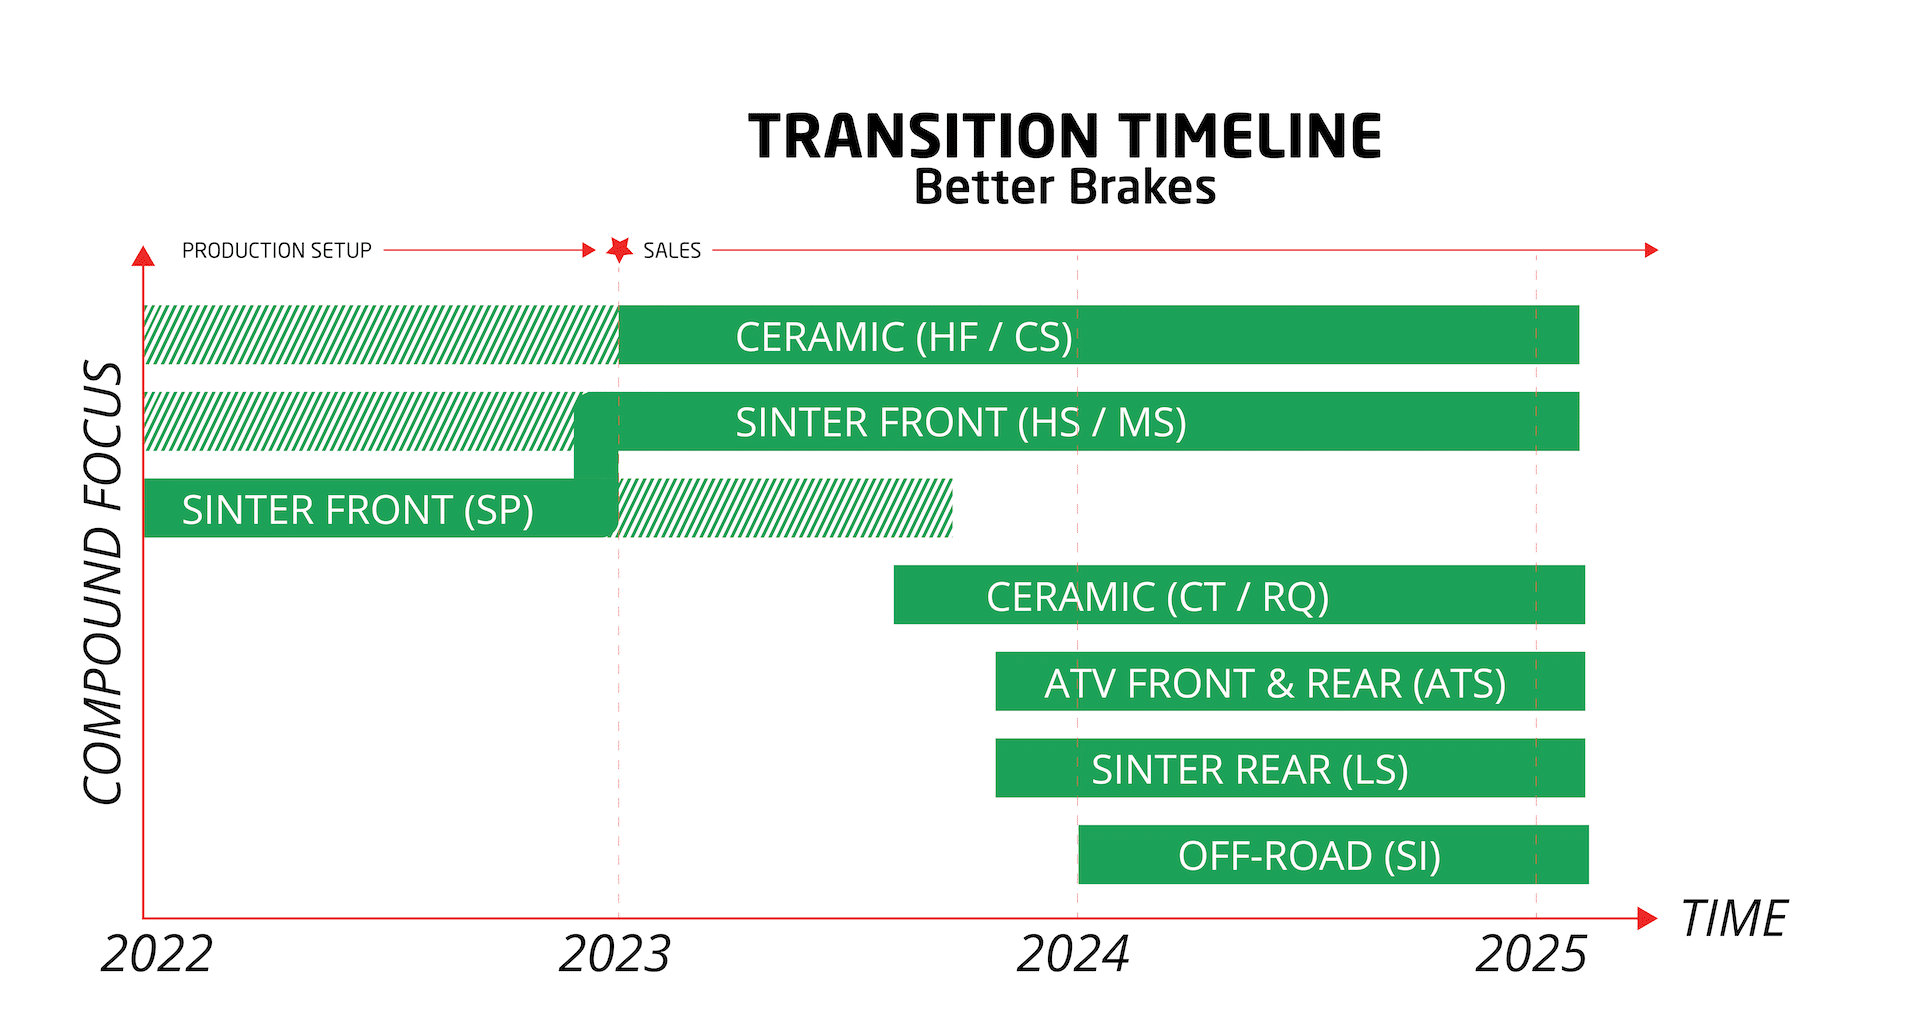 SBS Better Brakes is entering the 2nd transition phase